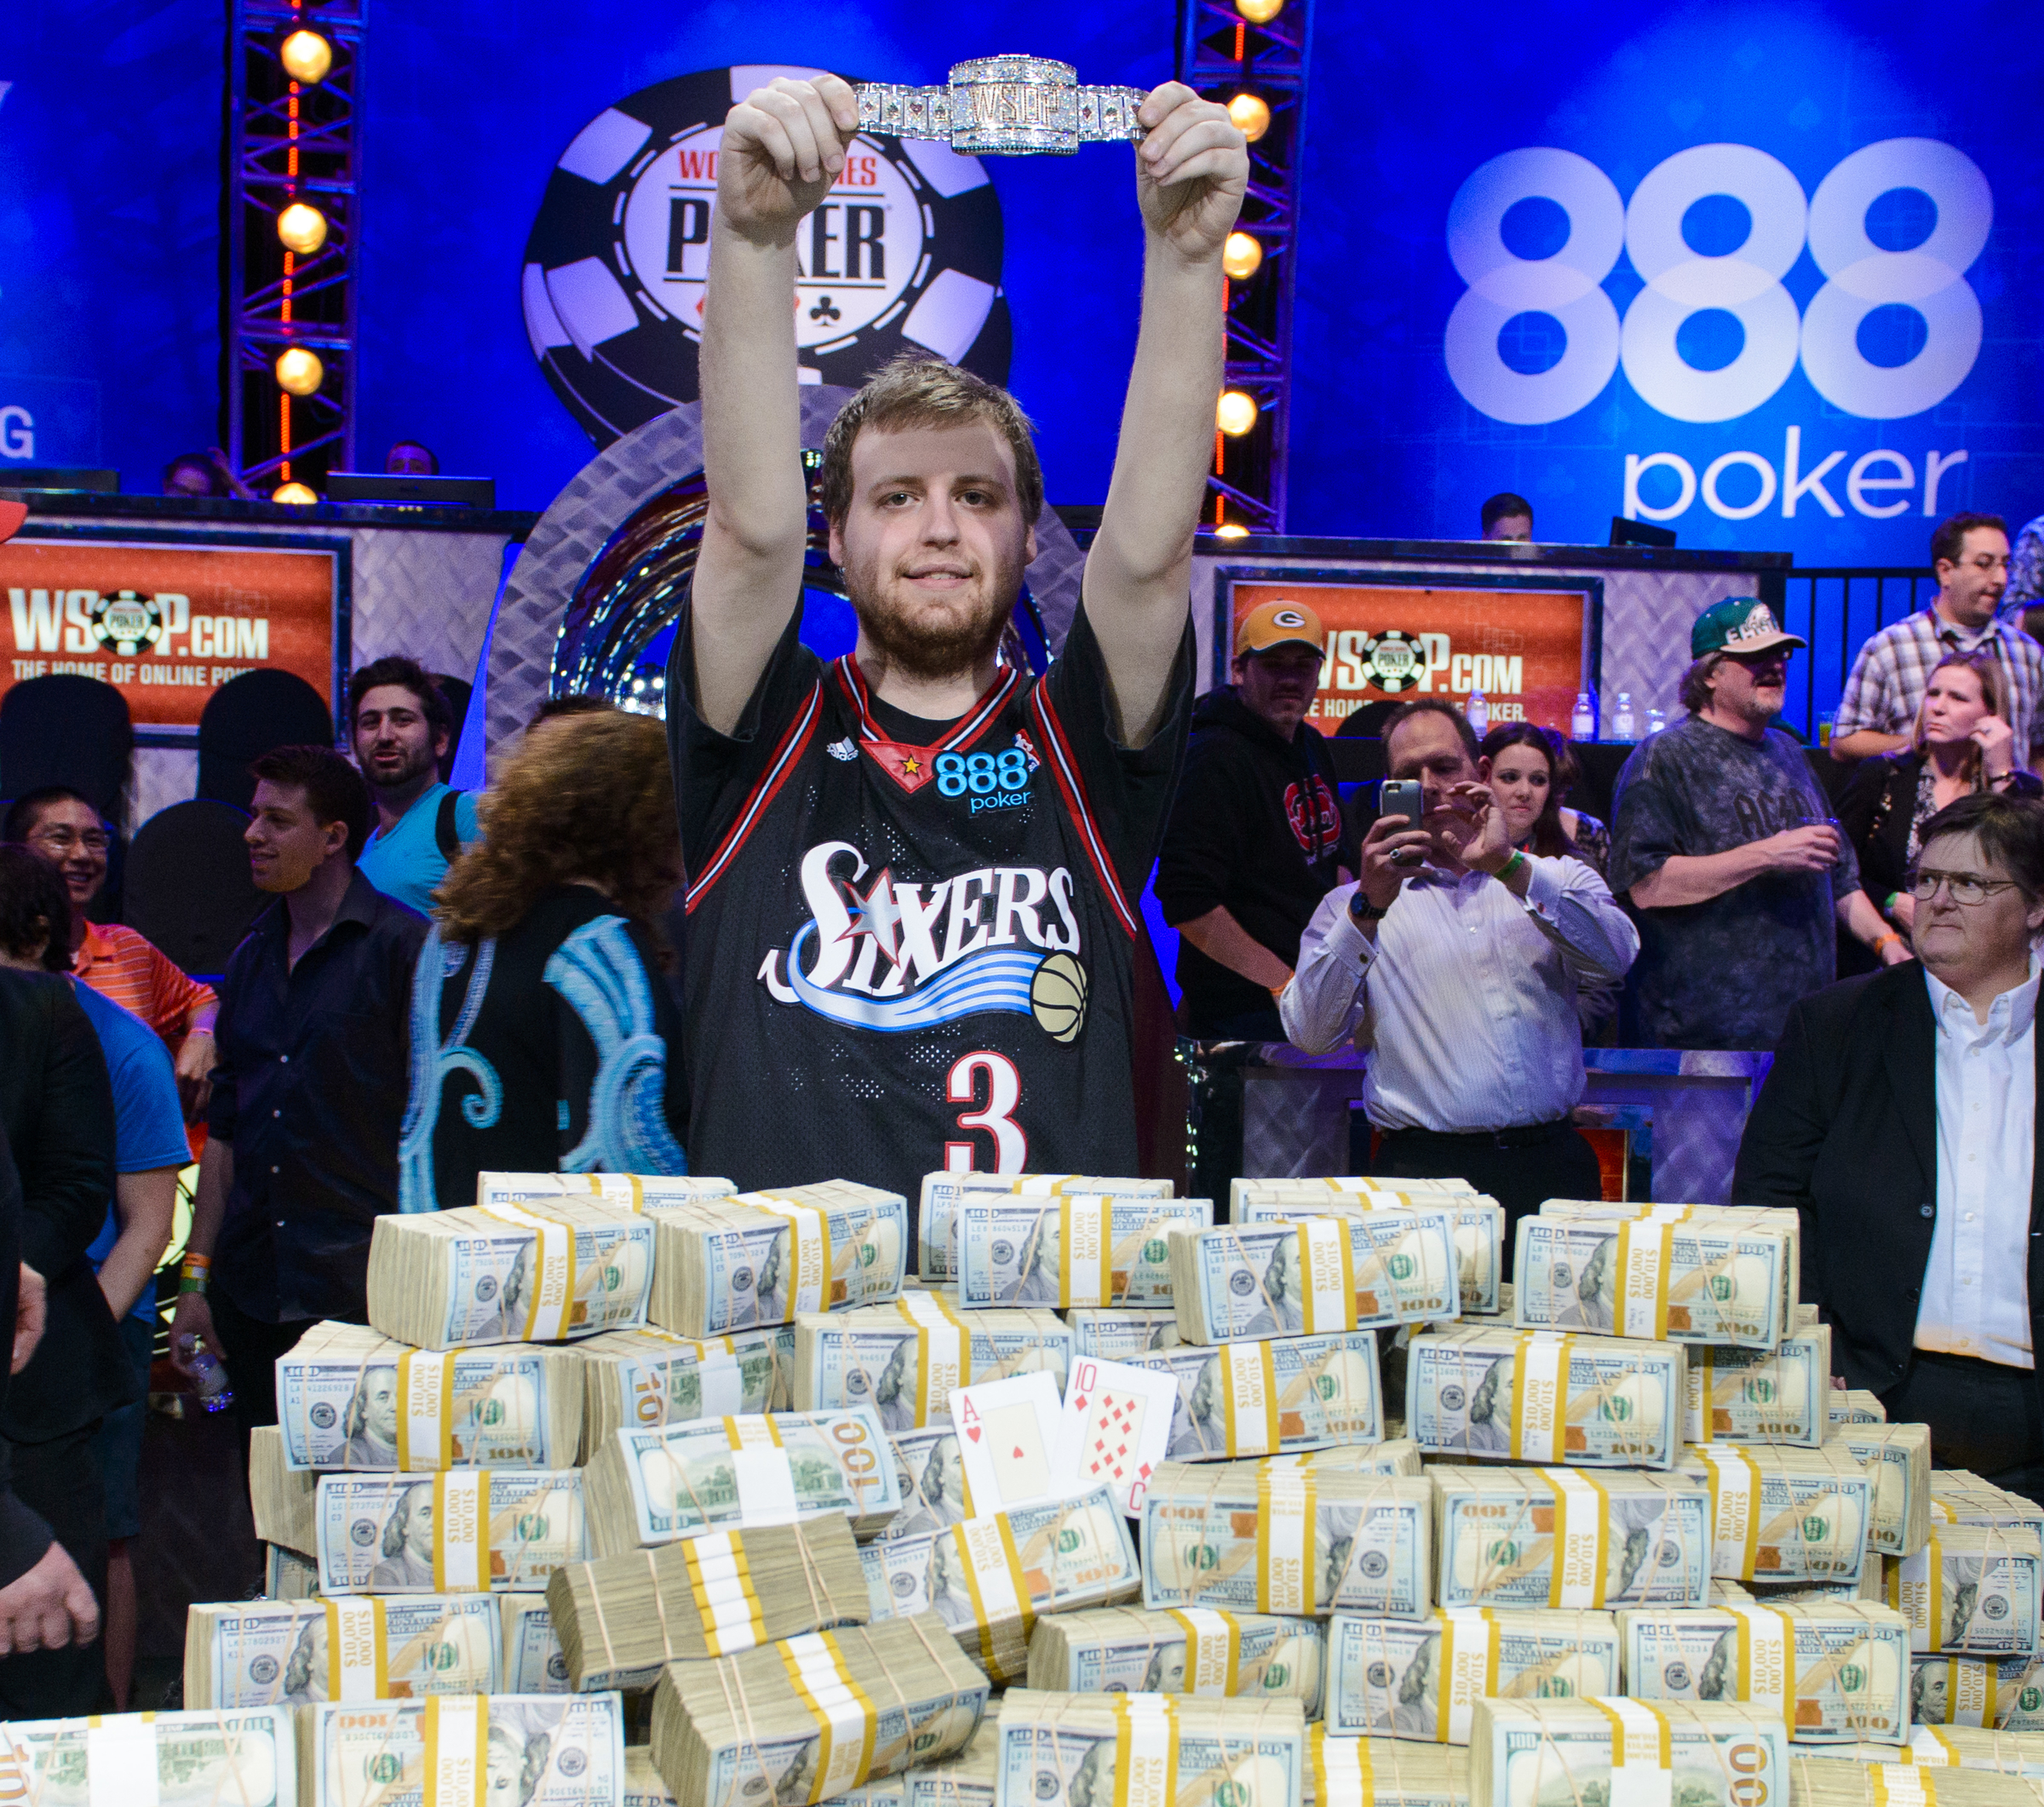 Joe McKeehen, WSOP 2015 Main Event Champion, on Poker Plays, Missed Opportunities, and Newfound Riches: CardsChat Exclusive Interview